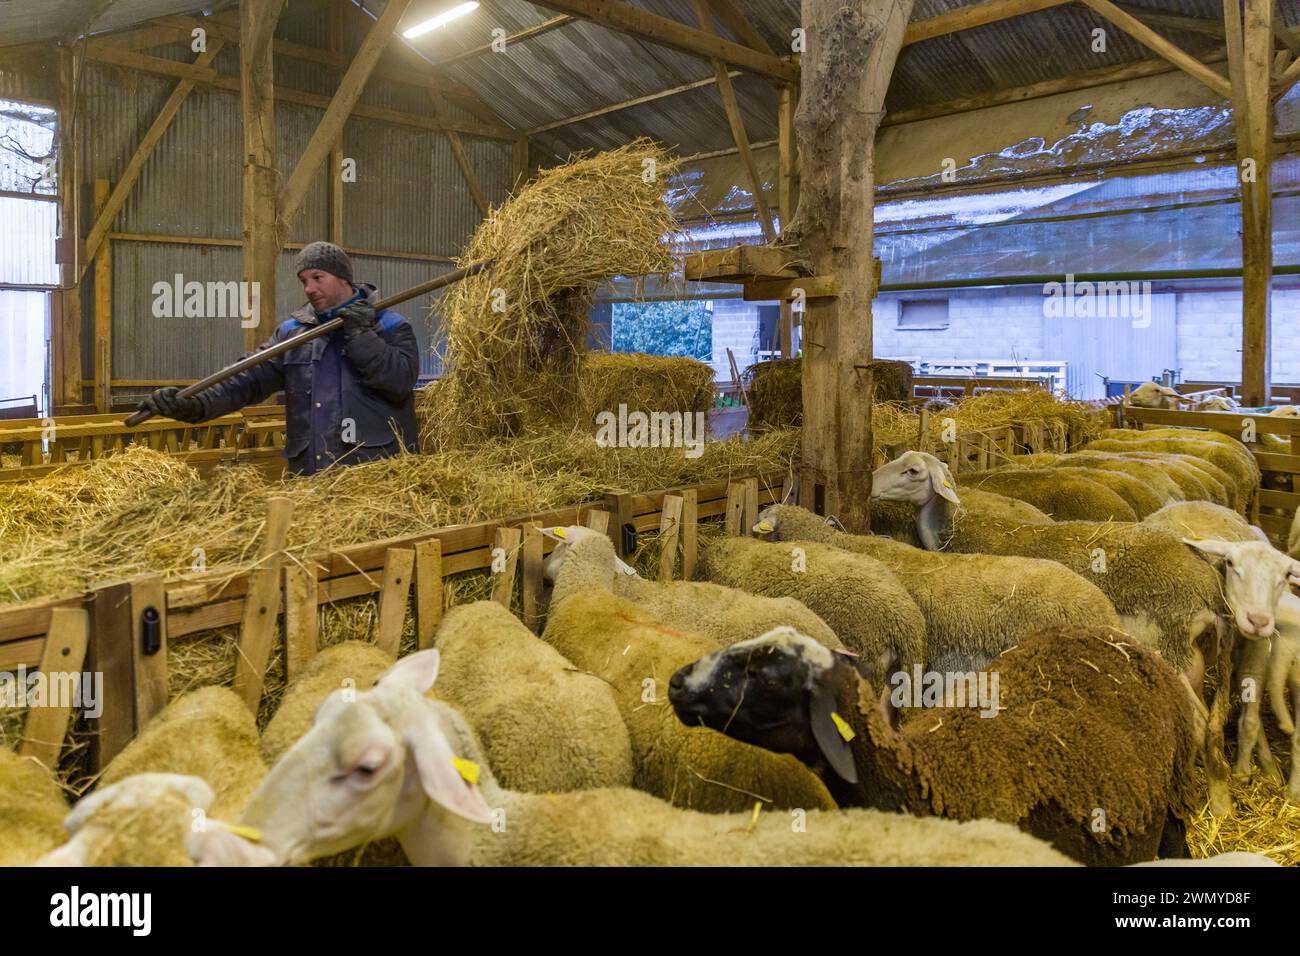 France, Indre et Loire, Loire valley listed as World Heritage by UNESCO, Saint-Ouen-Les-Vignes, Corbinière sheepfold, Agnès Le Douairon and Aurélien Girard raise lambs and produce sheep's and goat's cheese, all in organic farming Stock Photo